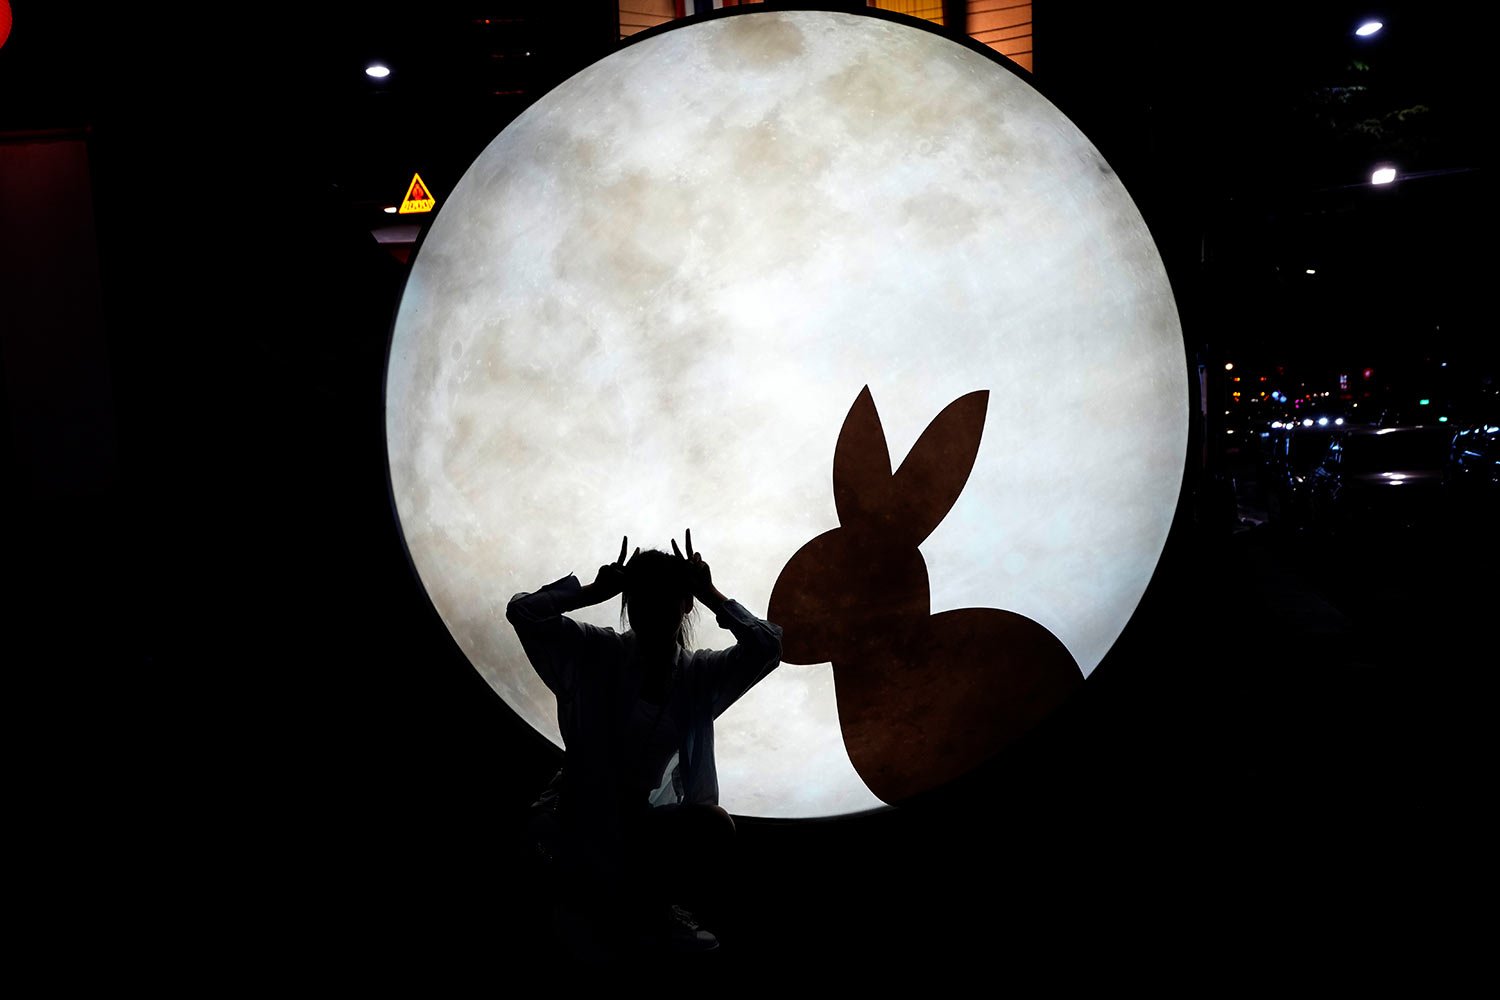  Niu Jiayi, a Chinese tourist, poses for a picture near a light sculpture for the Year of the Rabbit in Bangkok, Thailand, on Jan. 20, 2023.  (AP Photo/Sakchai Lalit) 